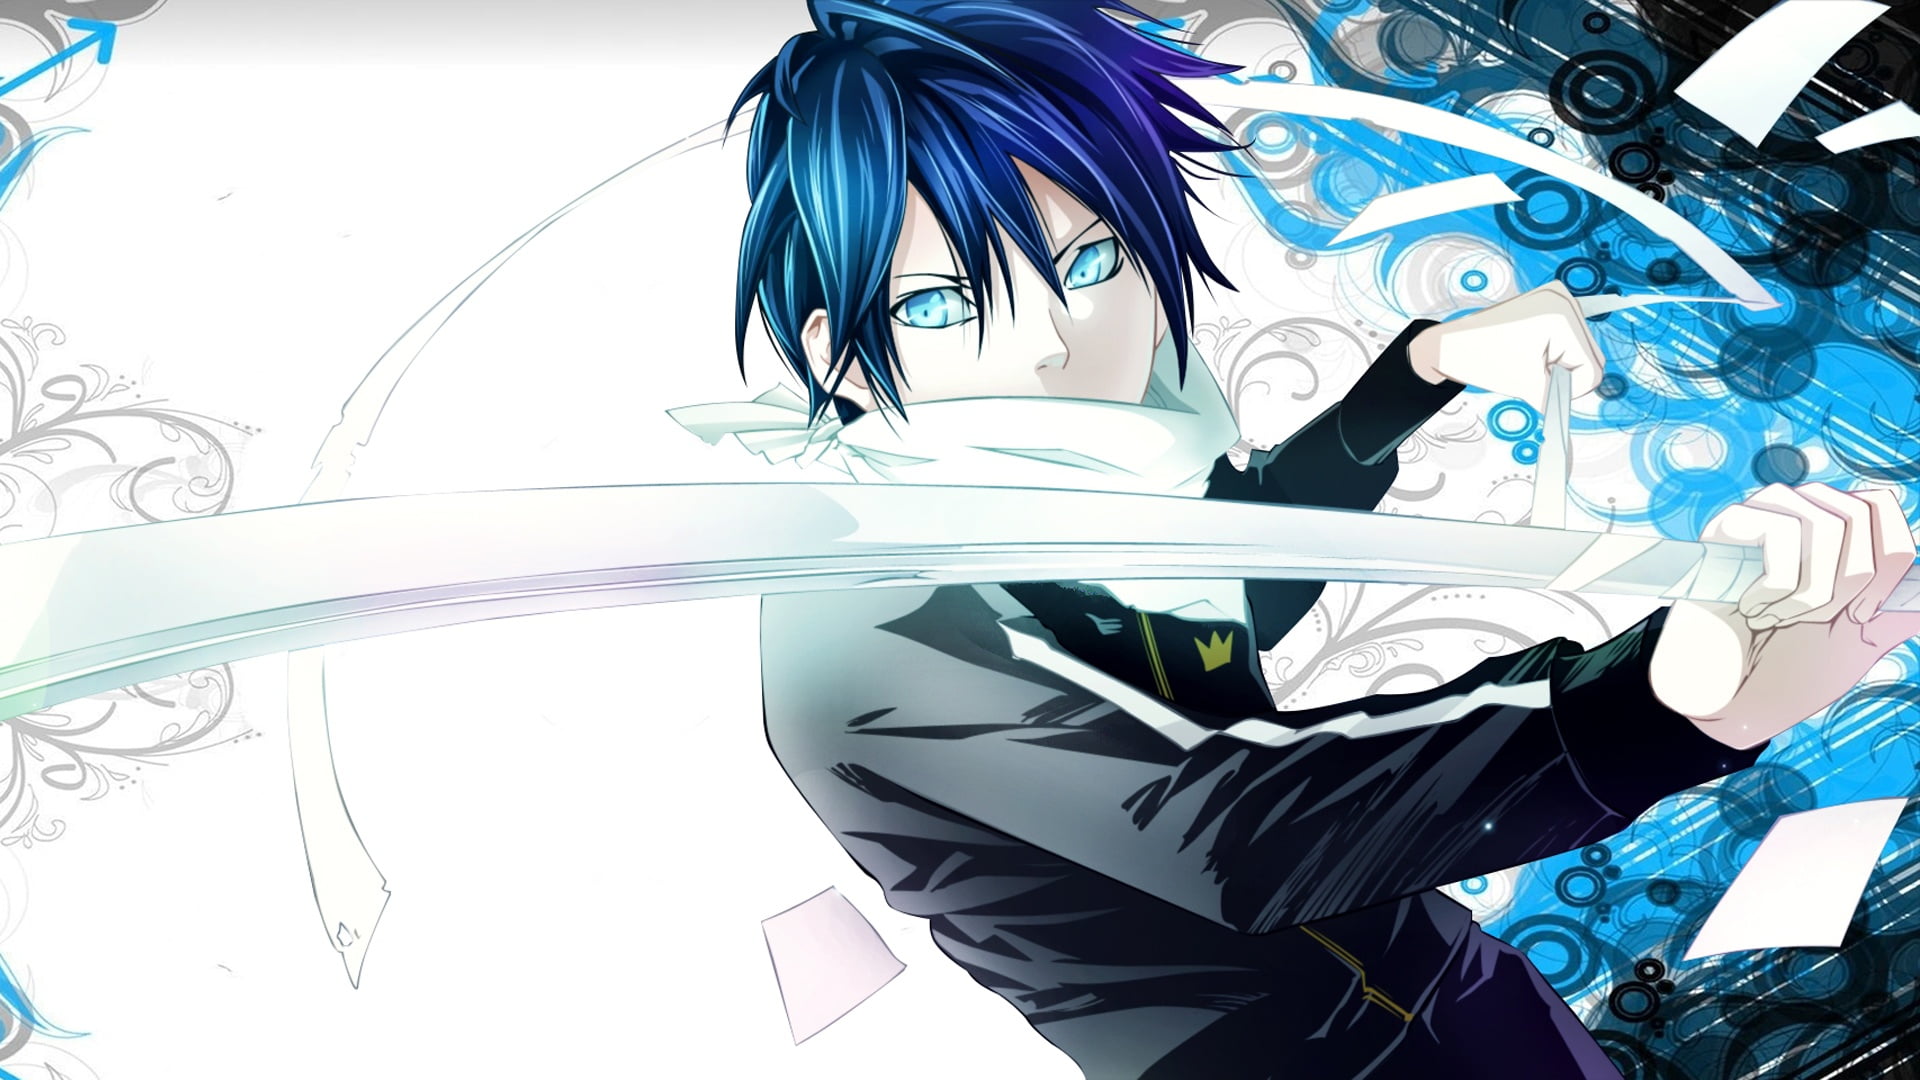 5. "Yato from Noragami" - wide 1